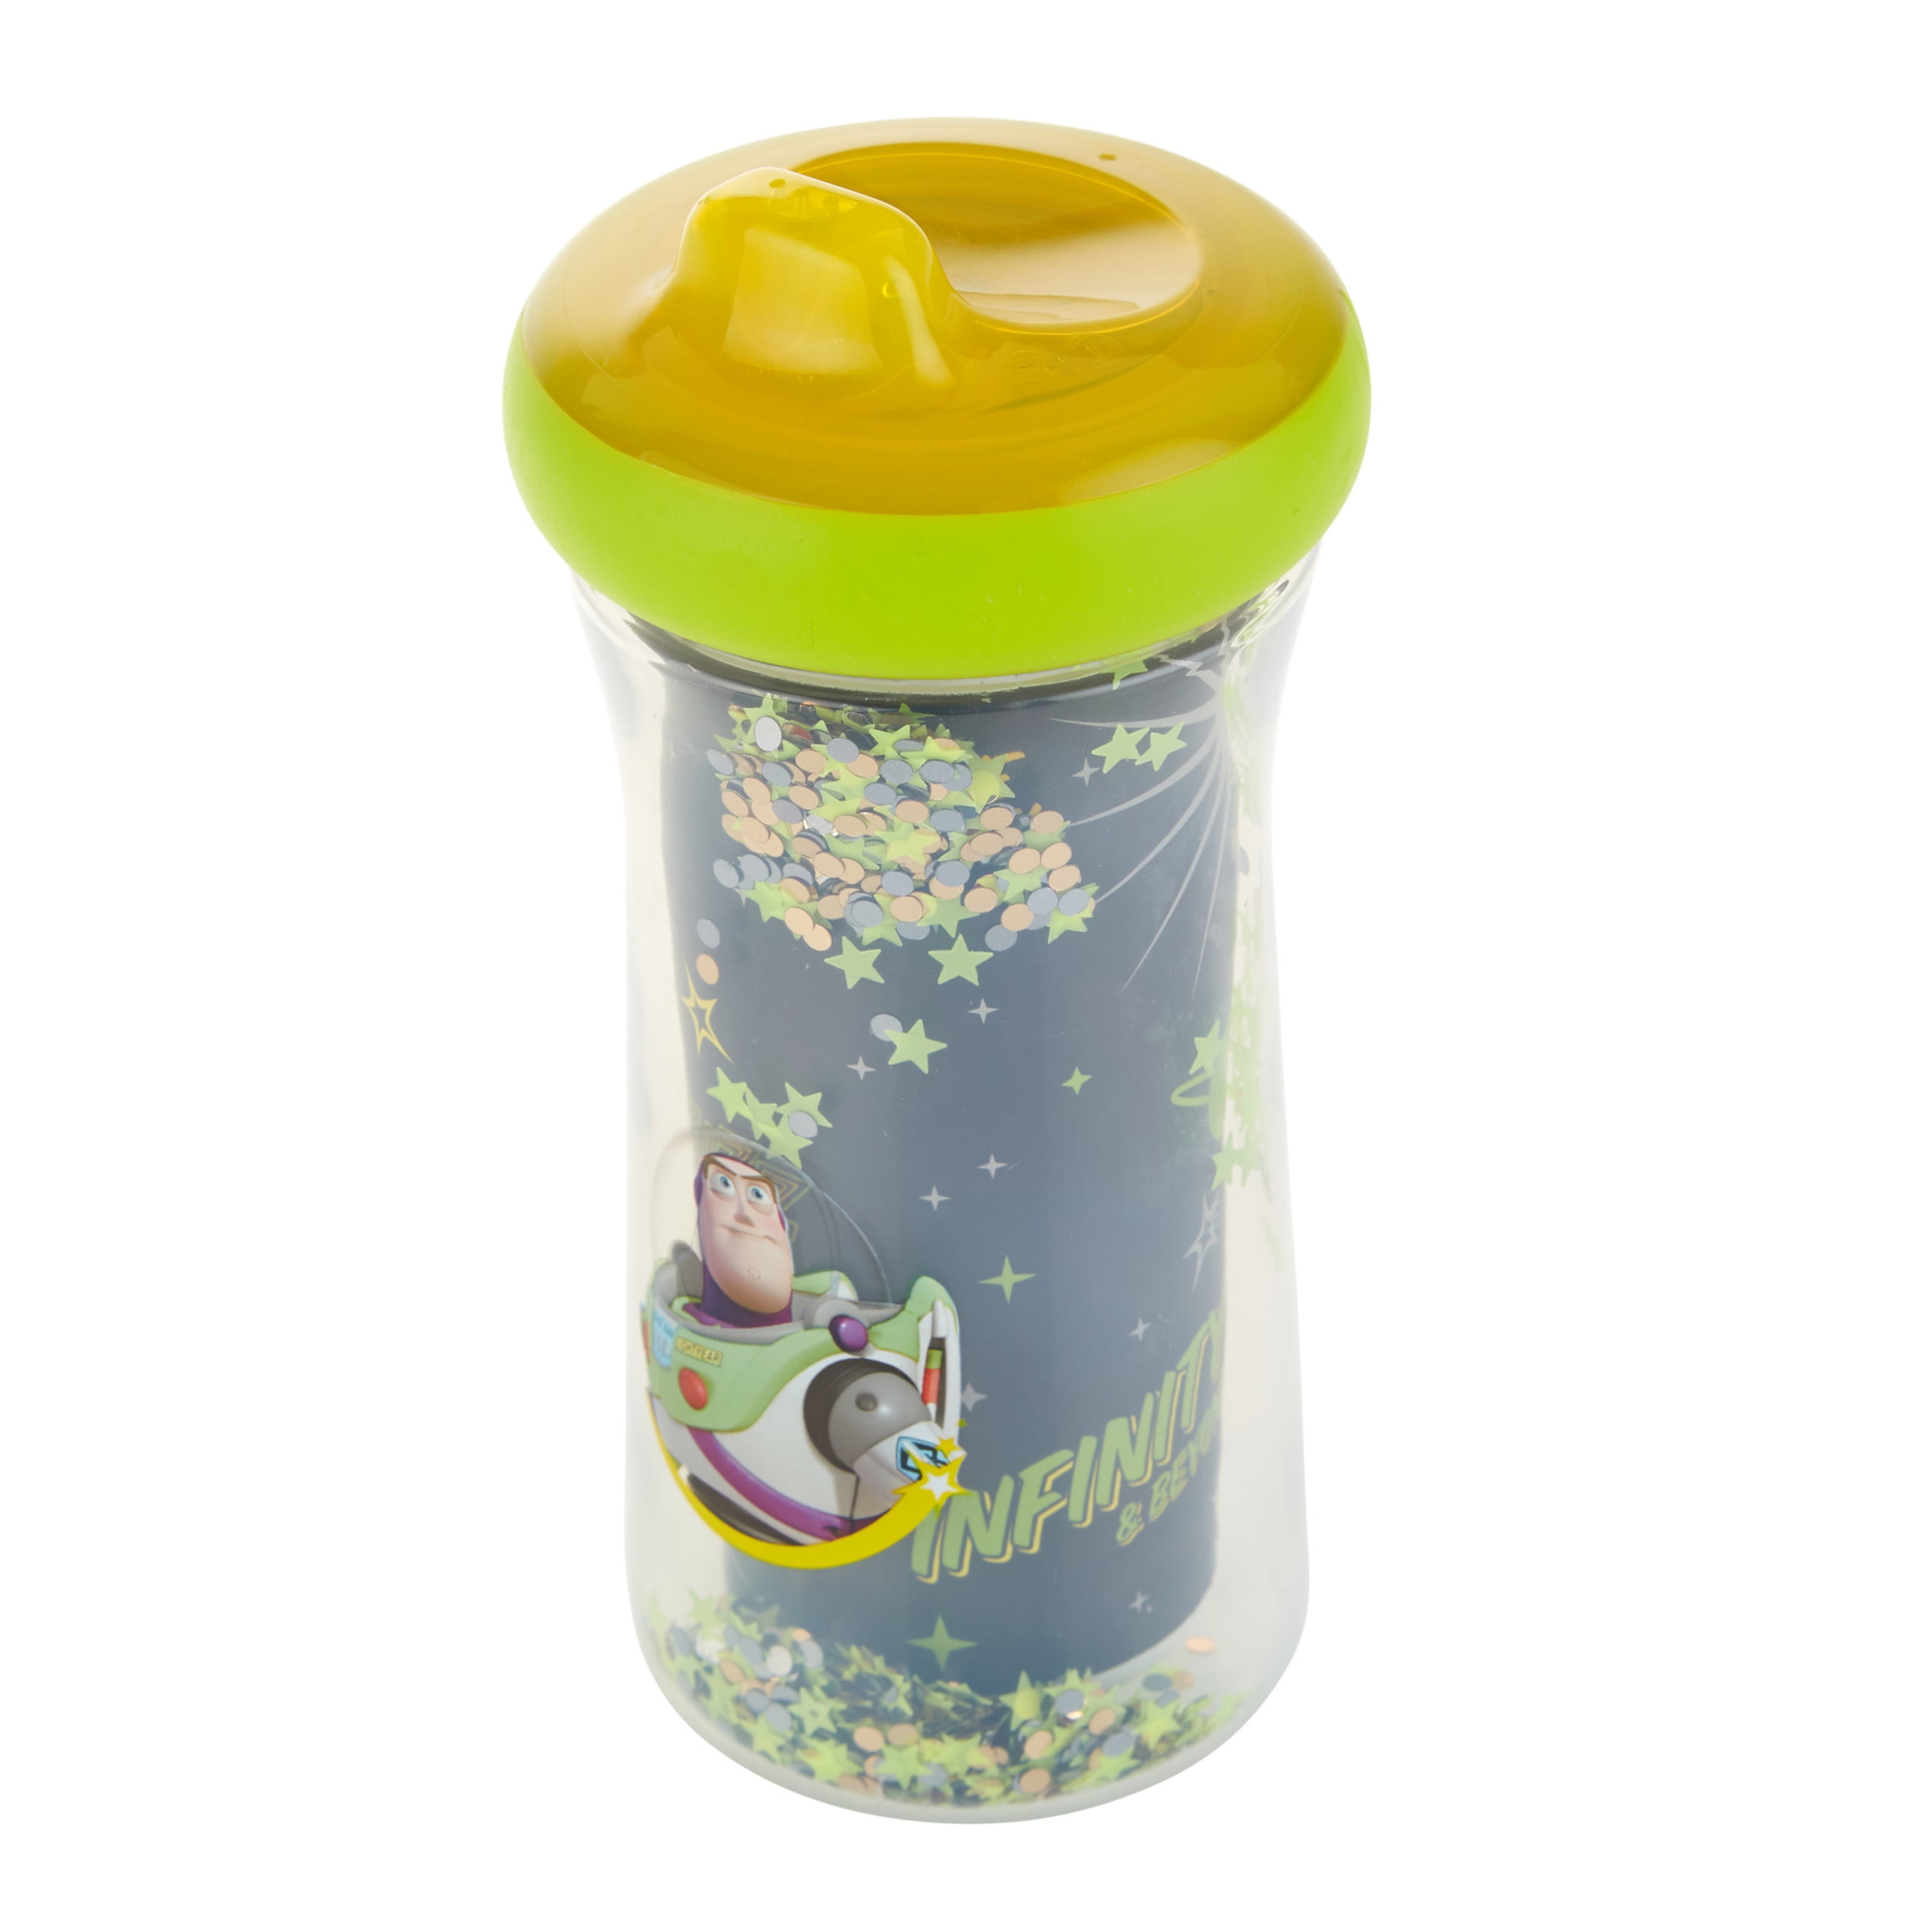 What About Sippy Cups? - TEIS, Inc